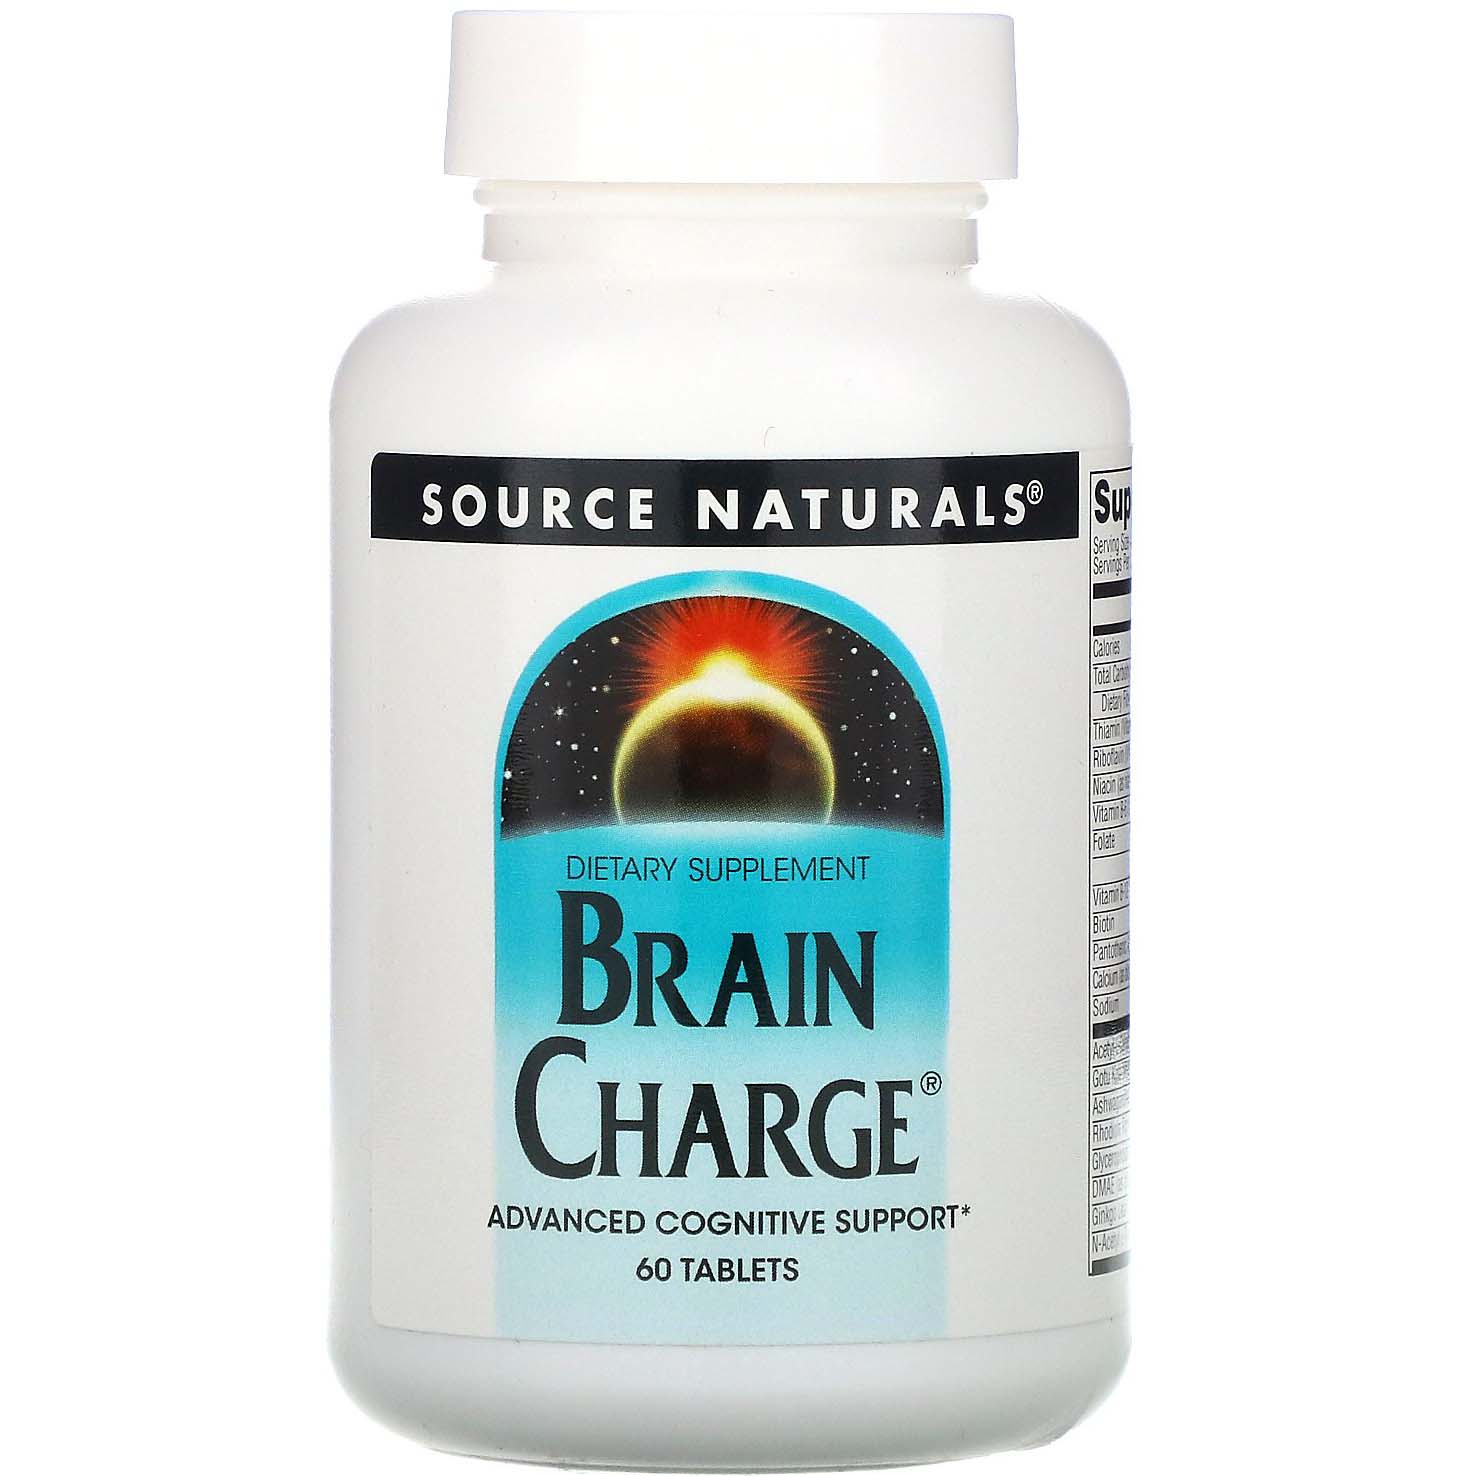 Source Naturals Brain Charge, 60 Tablets